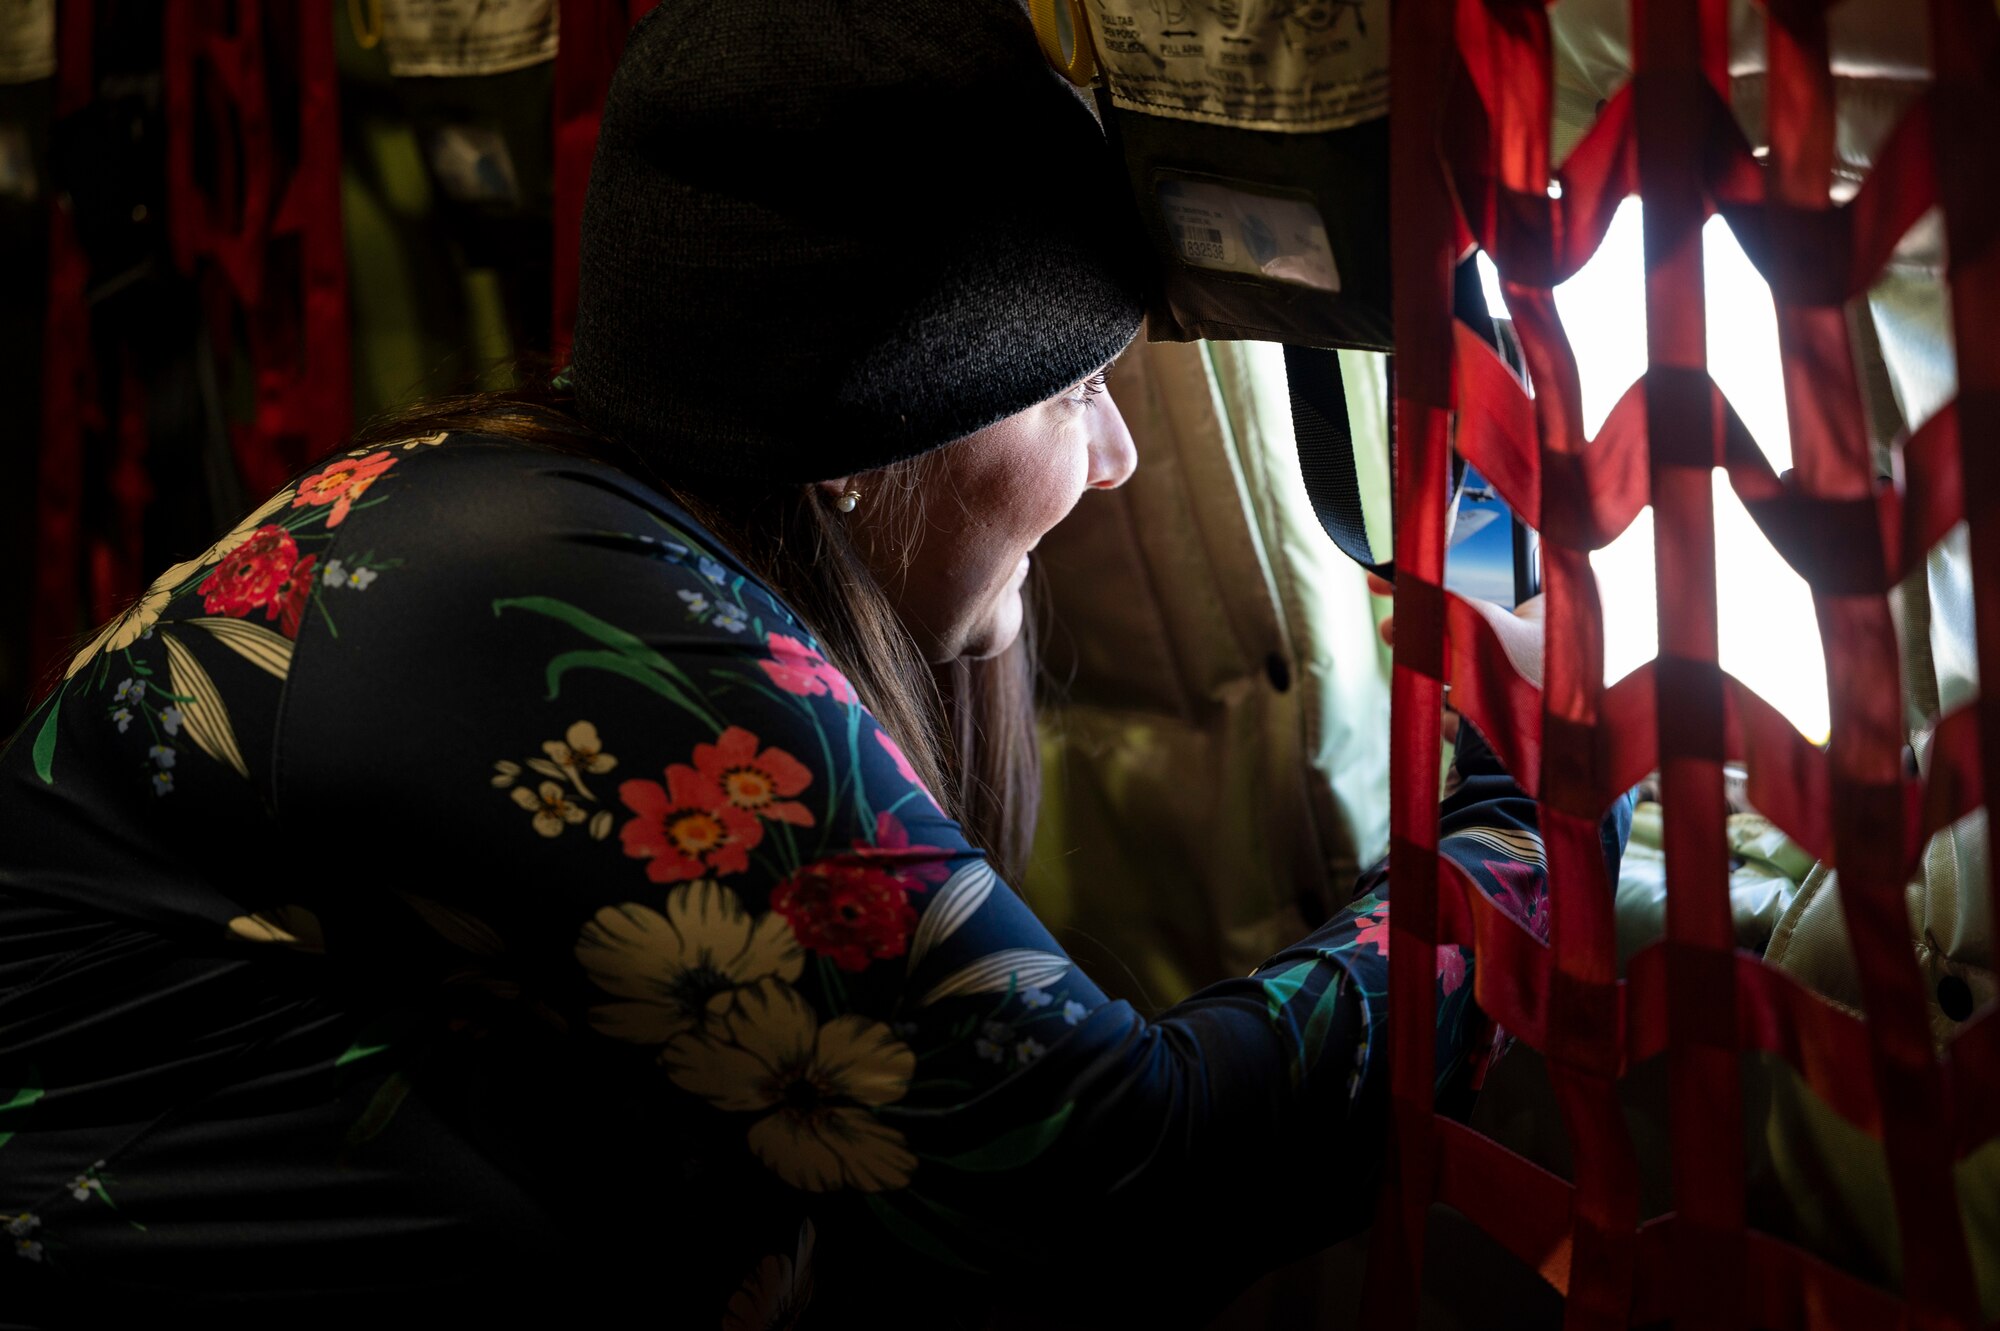 Nicole Neilson, a 49th Equipment Maintenance Squadron spouse, photographs an aircraft while inside a KC-135 Stratotanker from the 121st Air Refueling Wing at Rickenbacker Air National Guard Base, Columbus, Ohio, Nov. 15, 2022.